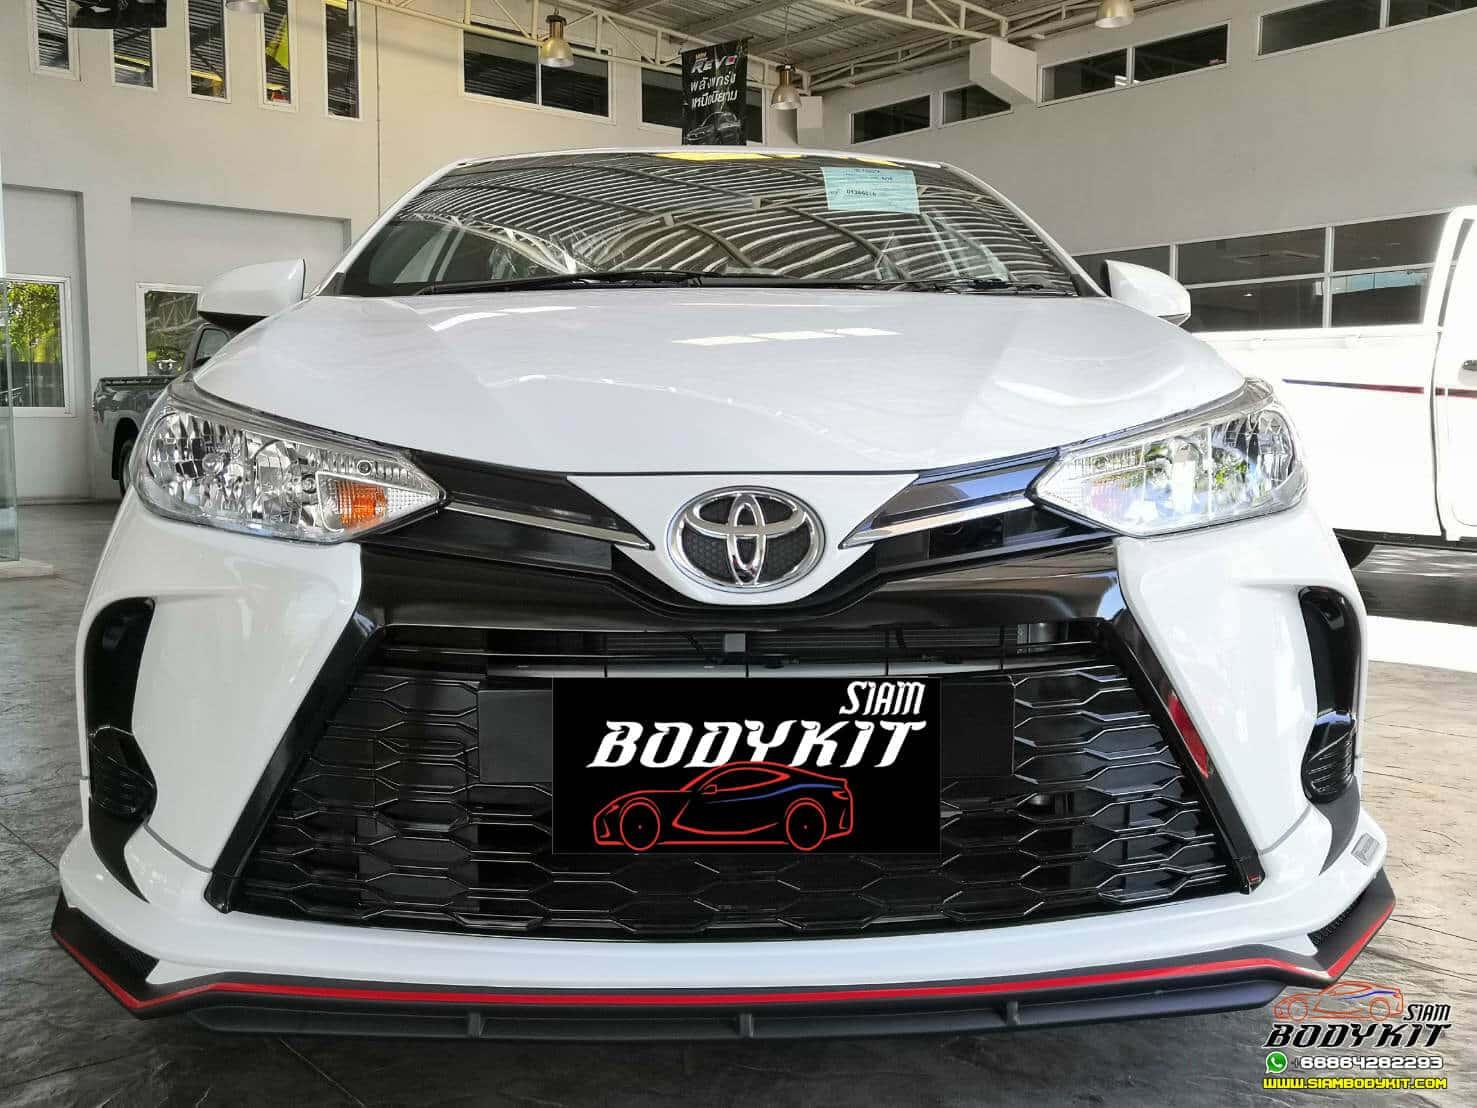 Fortezza Bodykit for Toyota Yaris 2020-2021 Hatchback (Color)